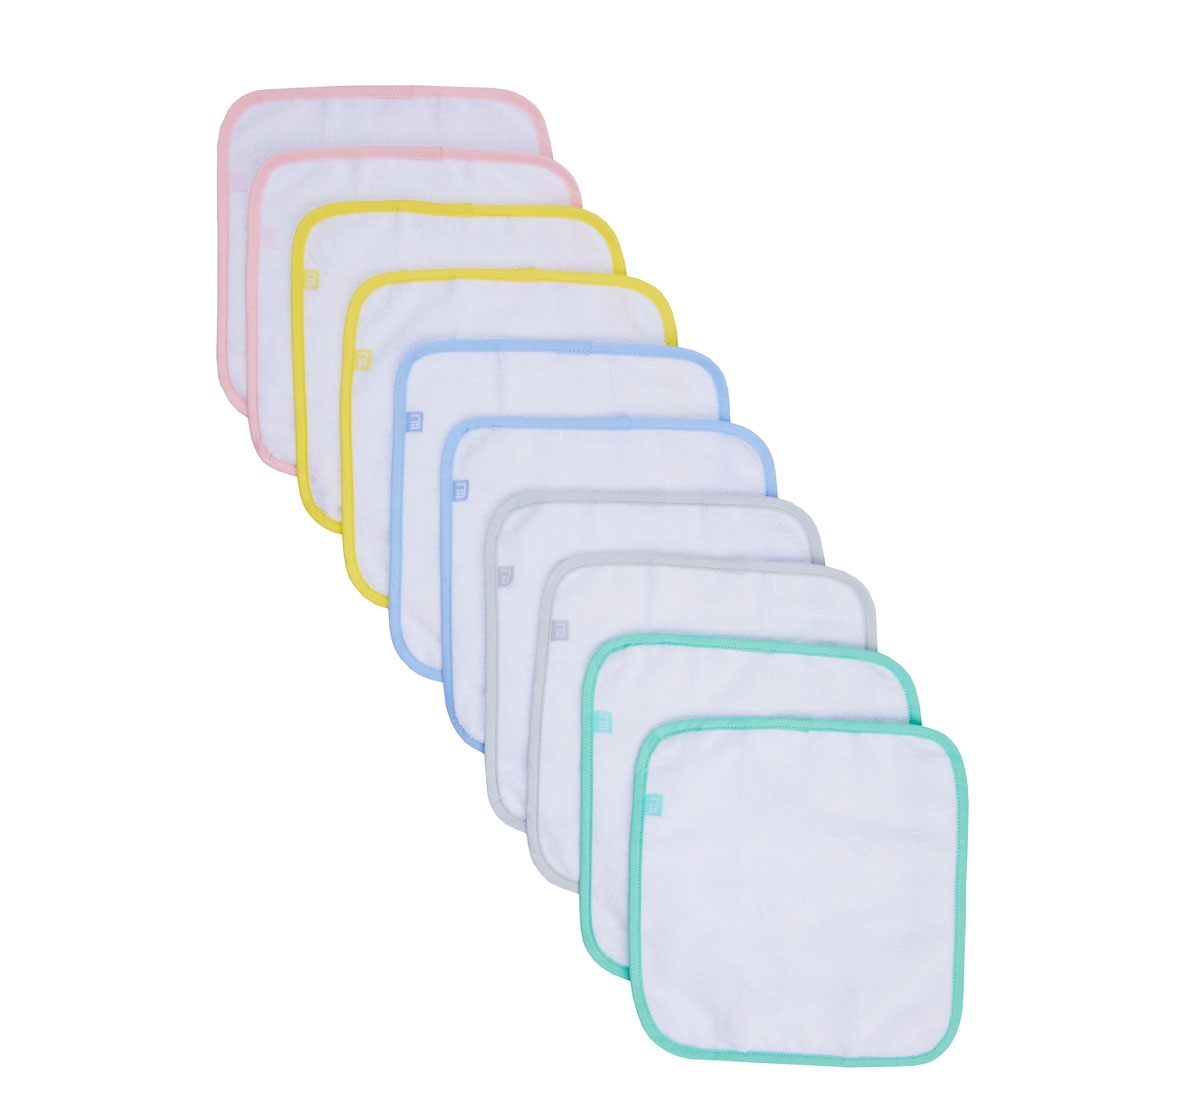 Mothercare | Mothercare Flannel 10pack With Colour Binding White 1